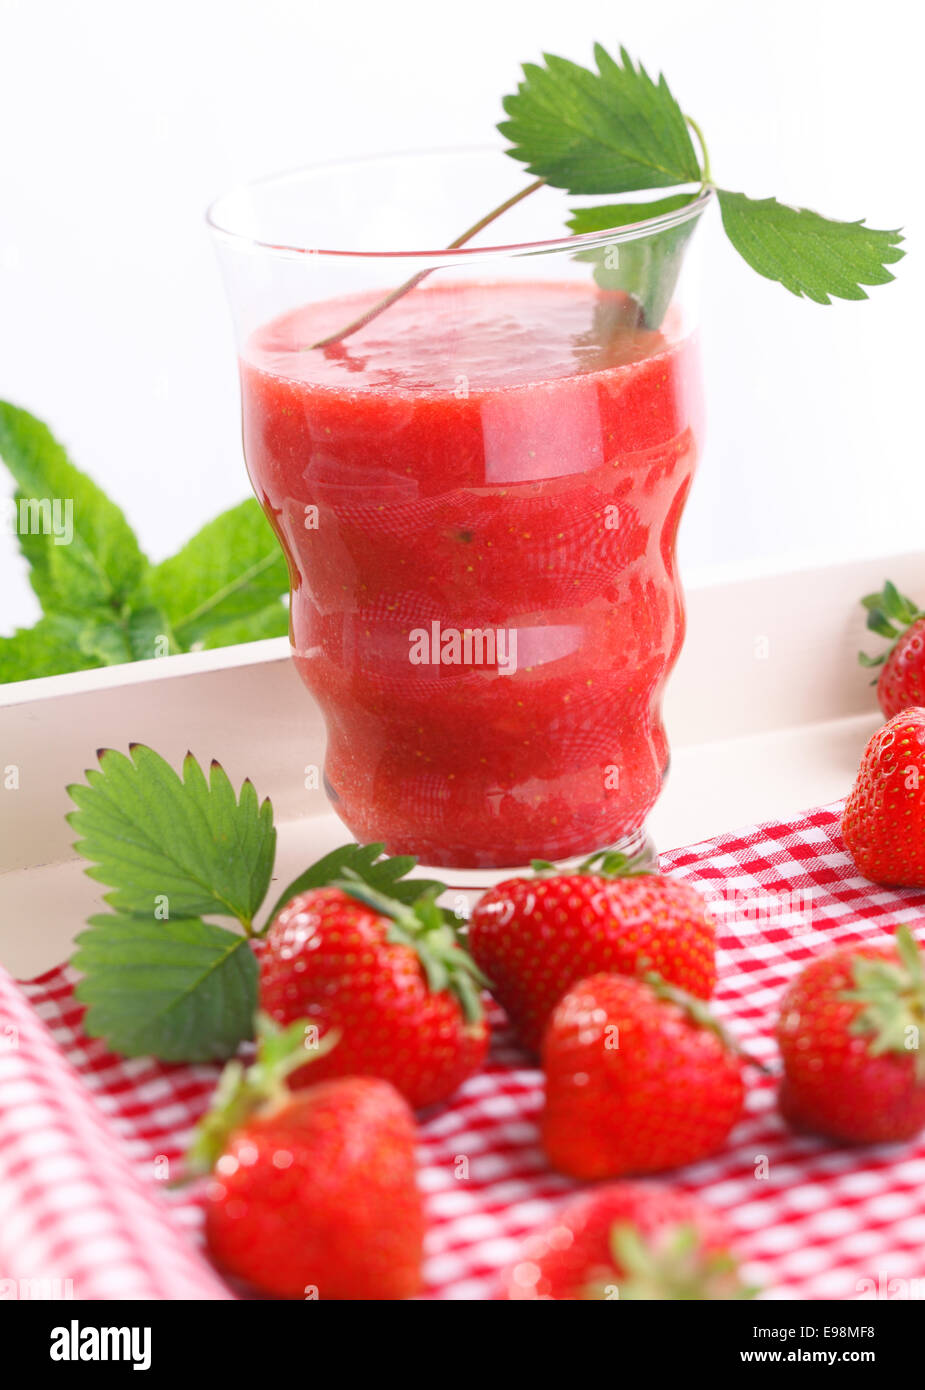 Refreshing strawberry smoothie surrounded by ripe red strawberries on a red and white checked napkin Stock Photo